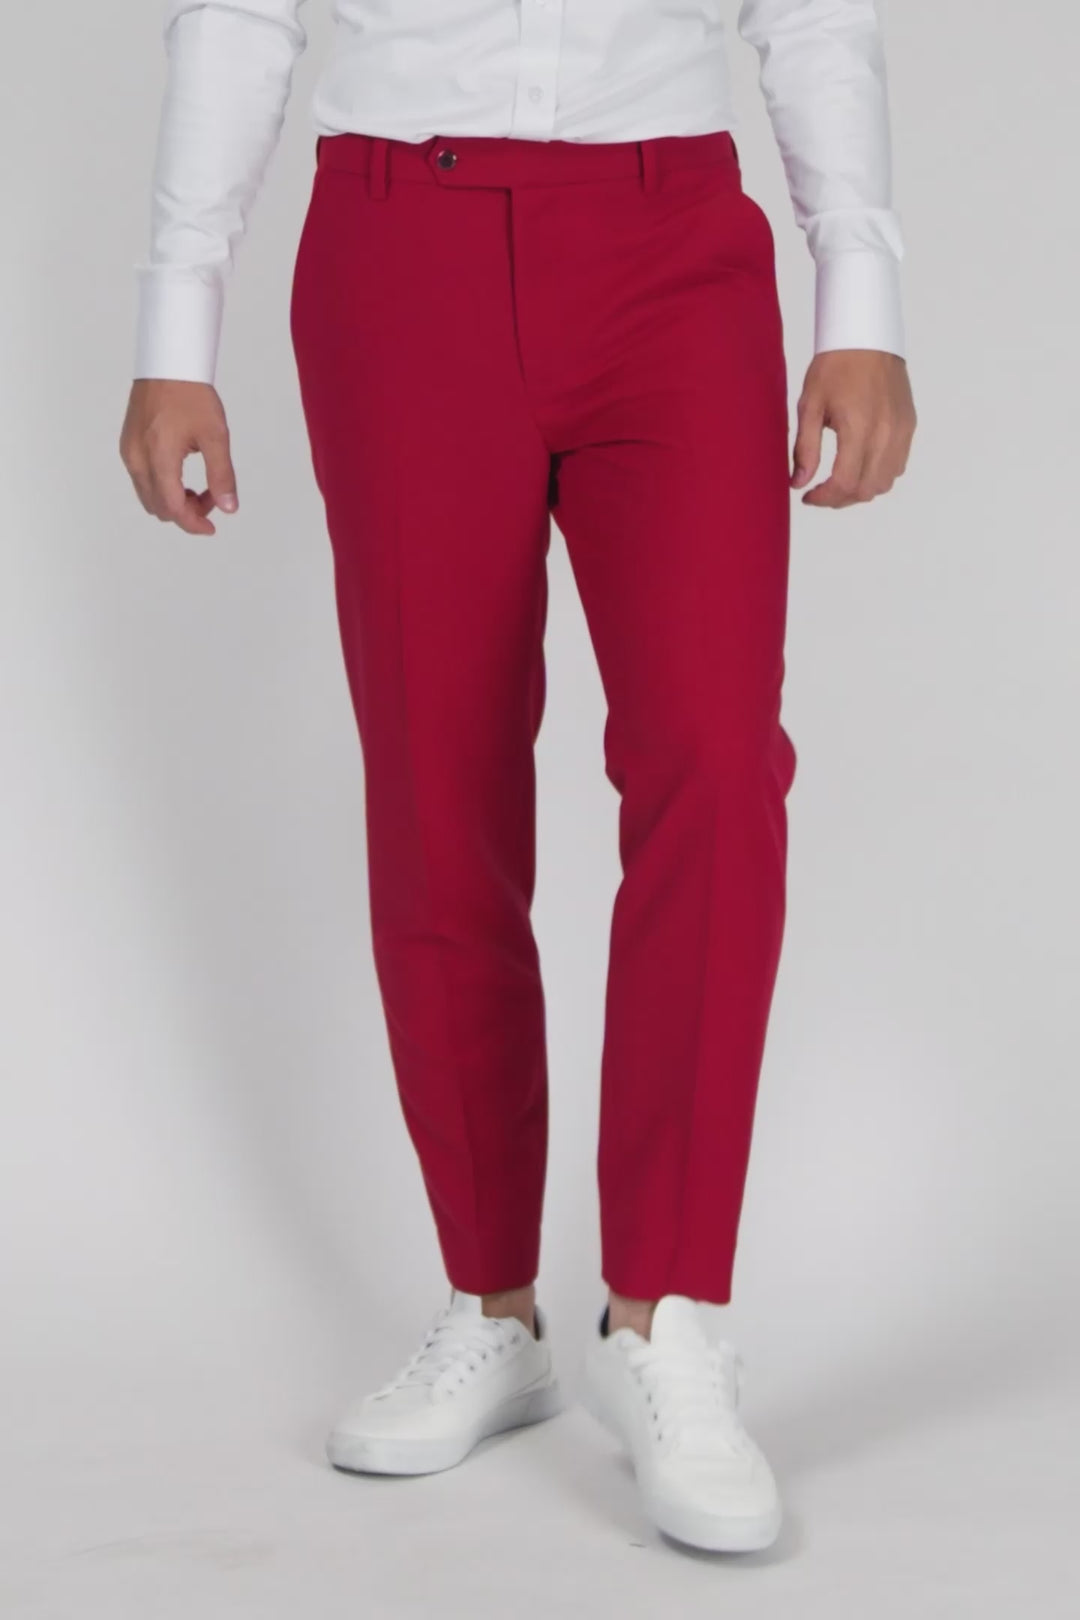 Spanish Red Stretch Pants